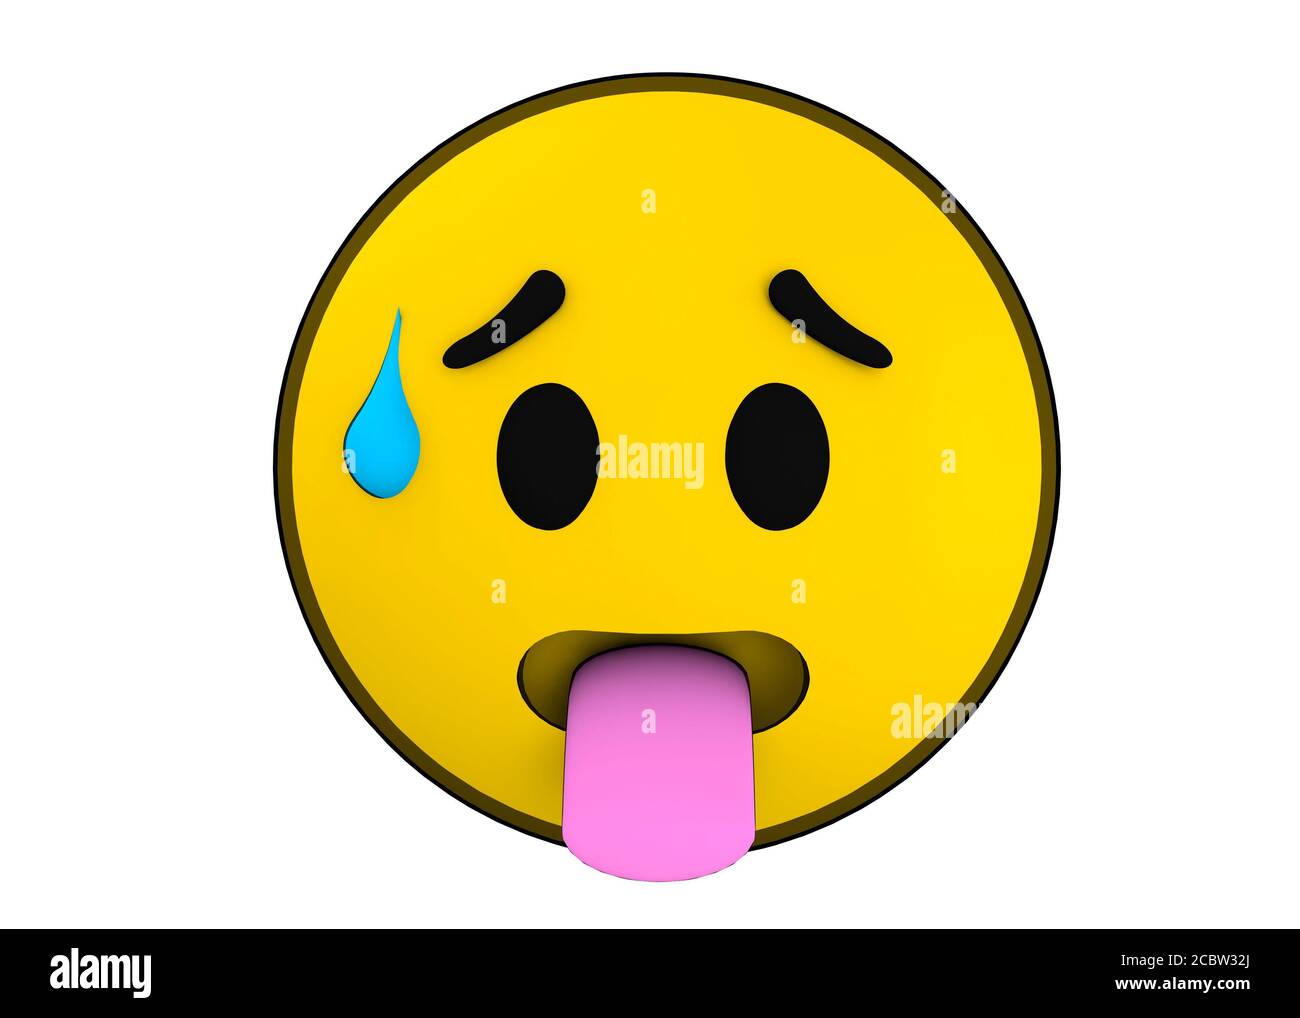 Tired Emoticon - 3D icon Stock Photo